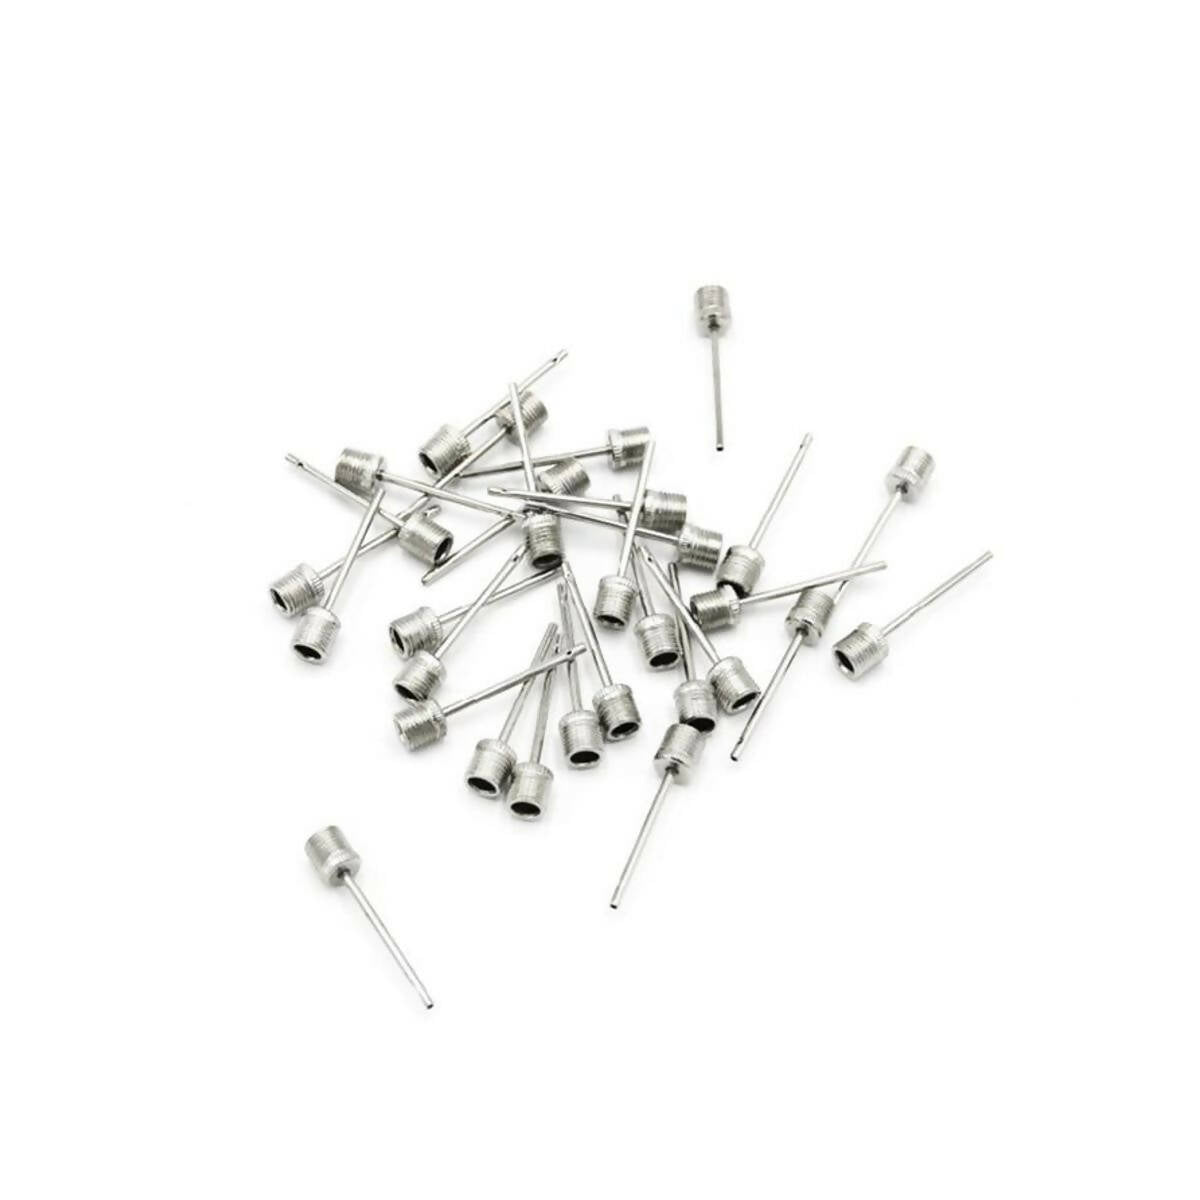 Pack of 100 - Sports Inflating Nozzle Needle Pin Nozzle